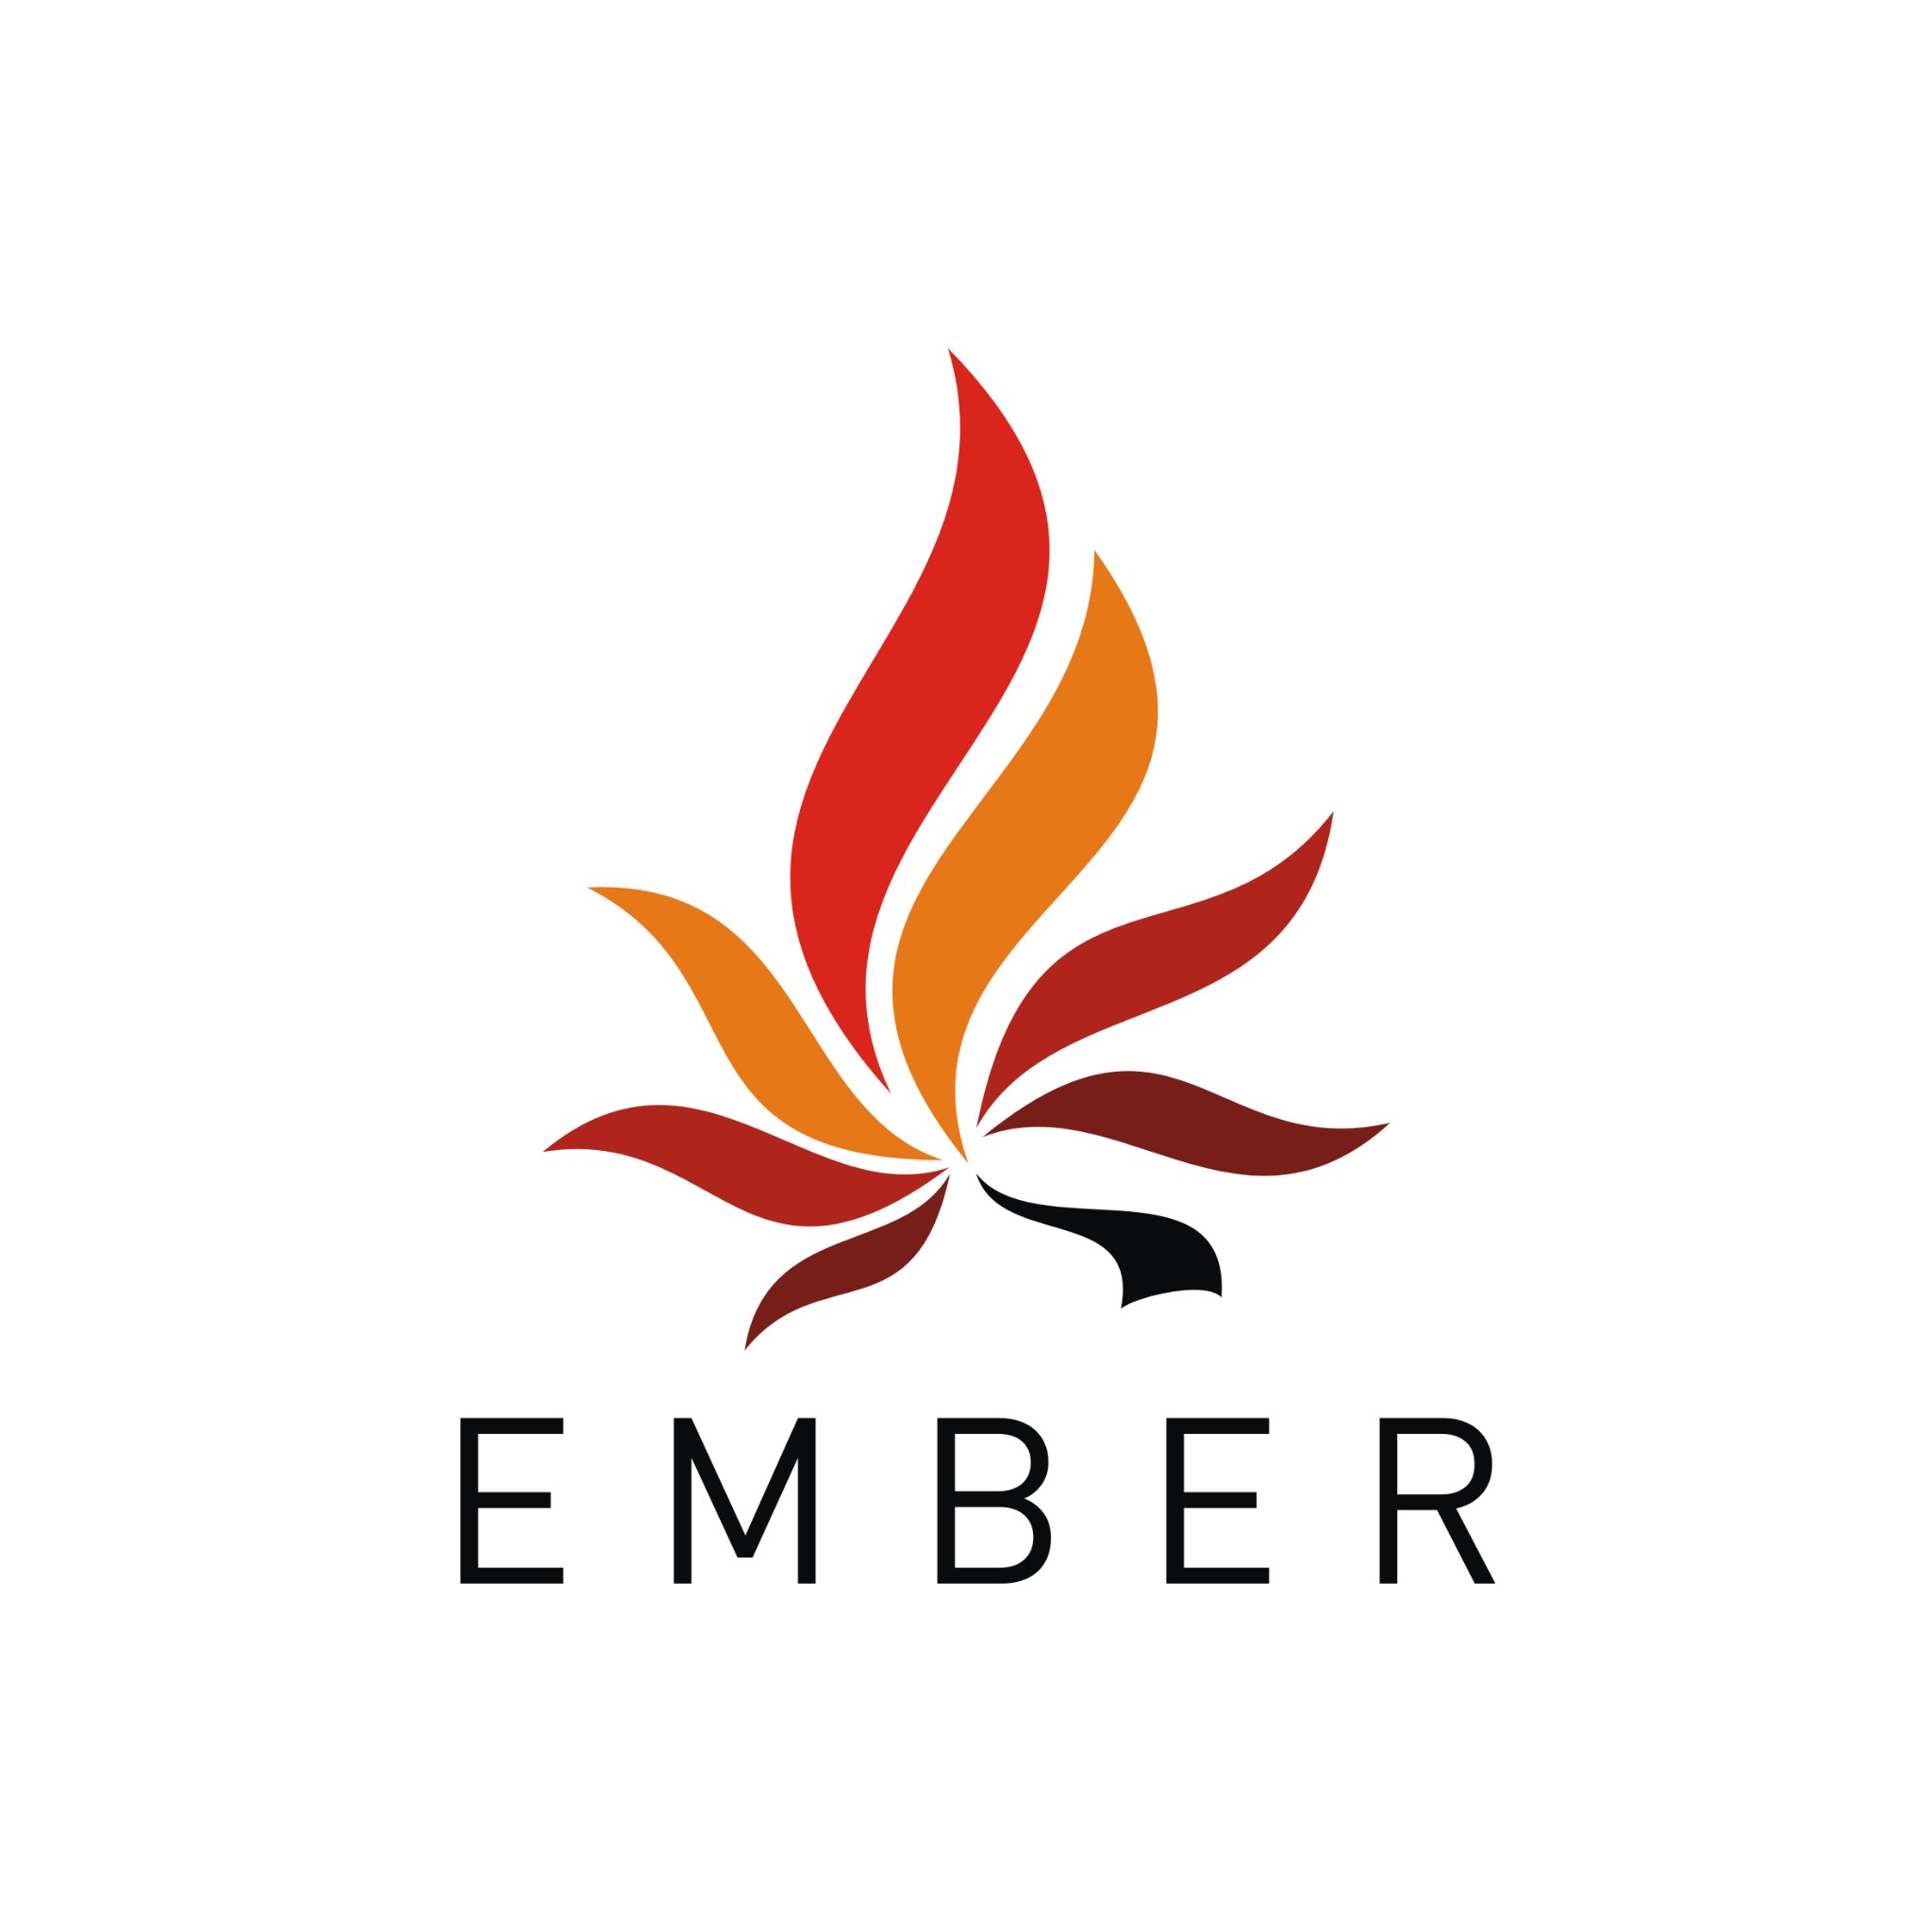 Licensed Montana Recreational & Medical Dispensary
By Following You Confirm That You Are 21+
Nothing for Sale On Twitter
#embermt #cannabis #marijuana #montana